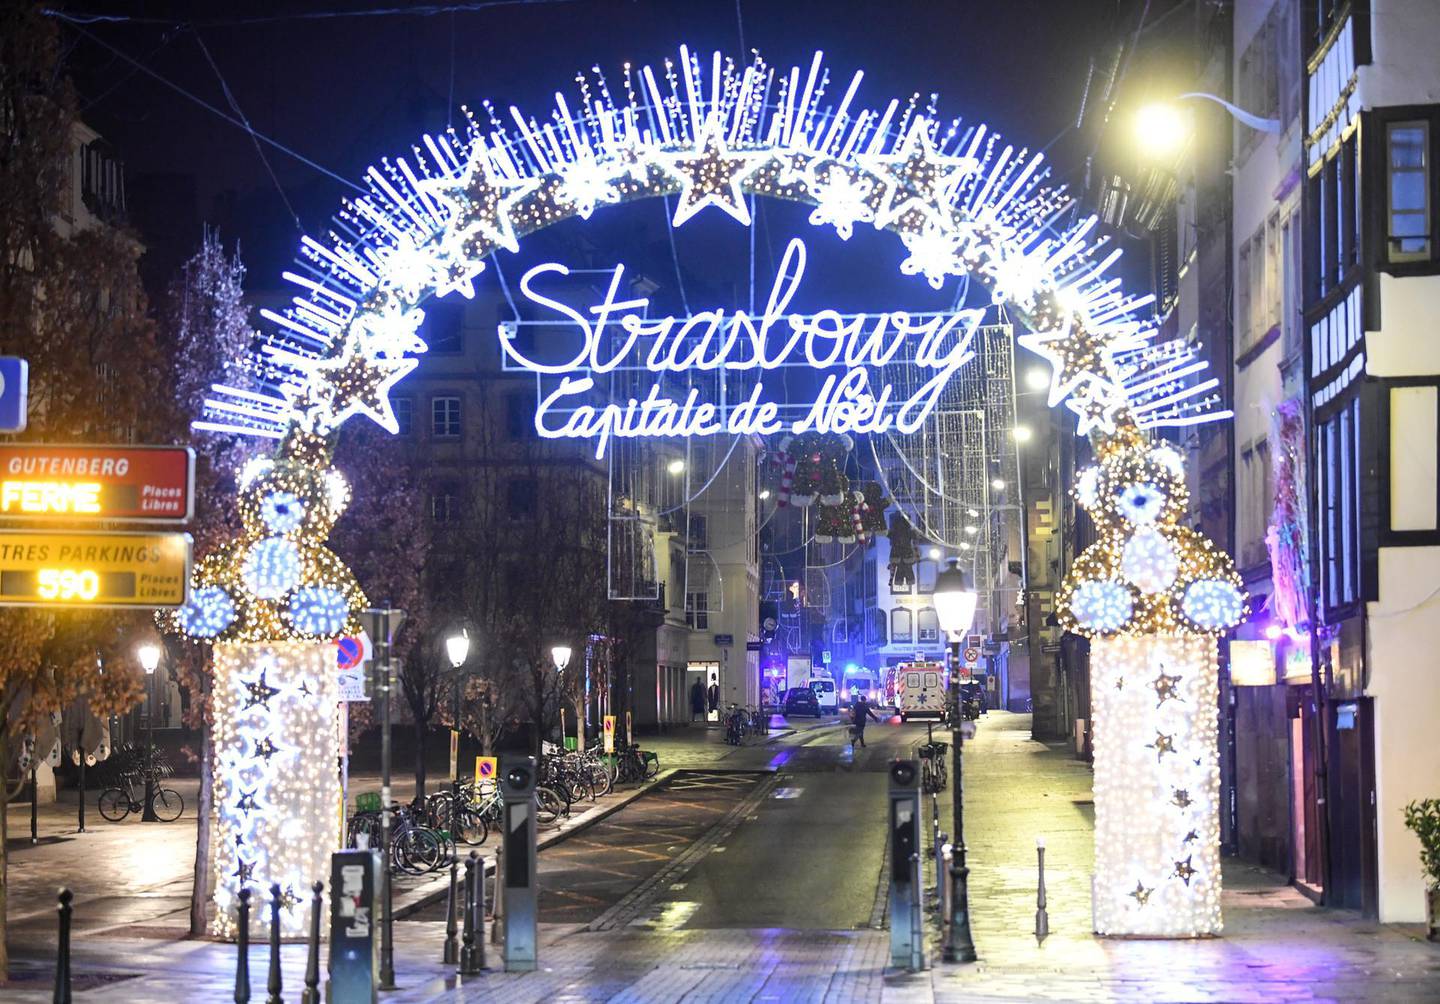 epa07224974 The logo of the Strasbourg Christmas market lights up at night where a deadly shooting took place in Strasbourg, France, 12 December 2018. According to media reports, four people have been killed and more than 10 people have been injured after a deadly attack at the Christmas market in Strasbourg. The gunman is reported to be at large and the motive for the attack is still unclear.  EPA/PATRICK SEEGER